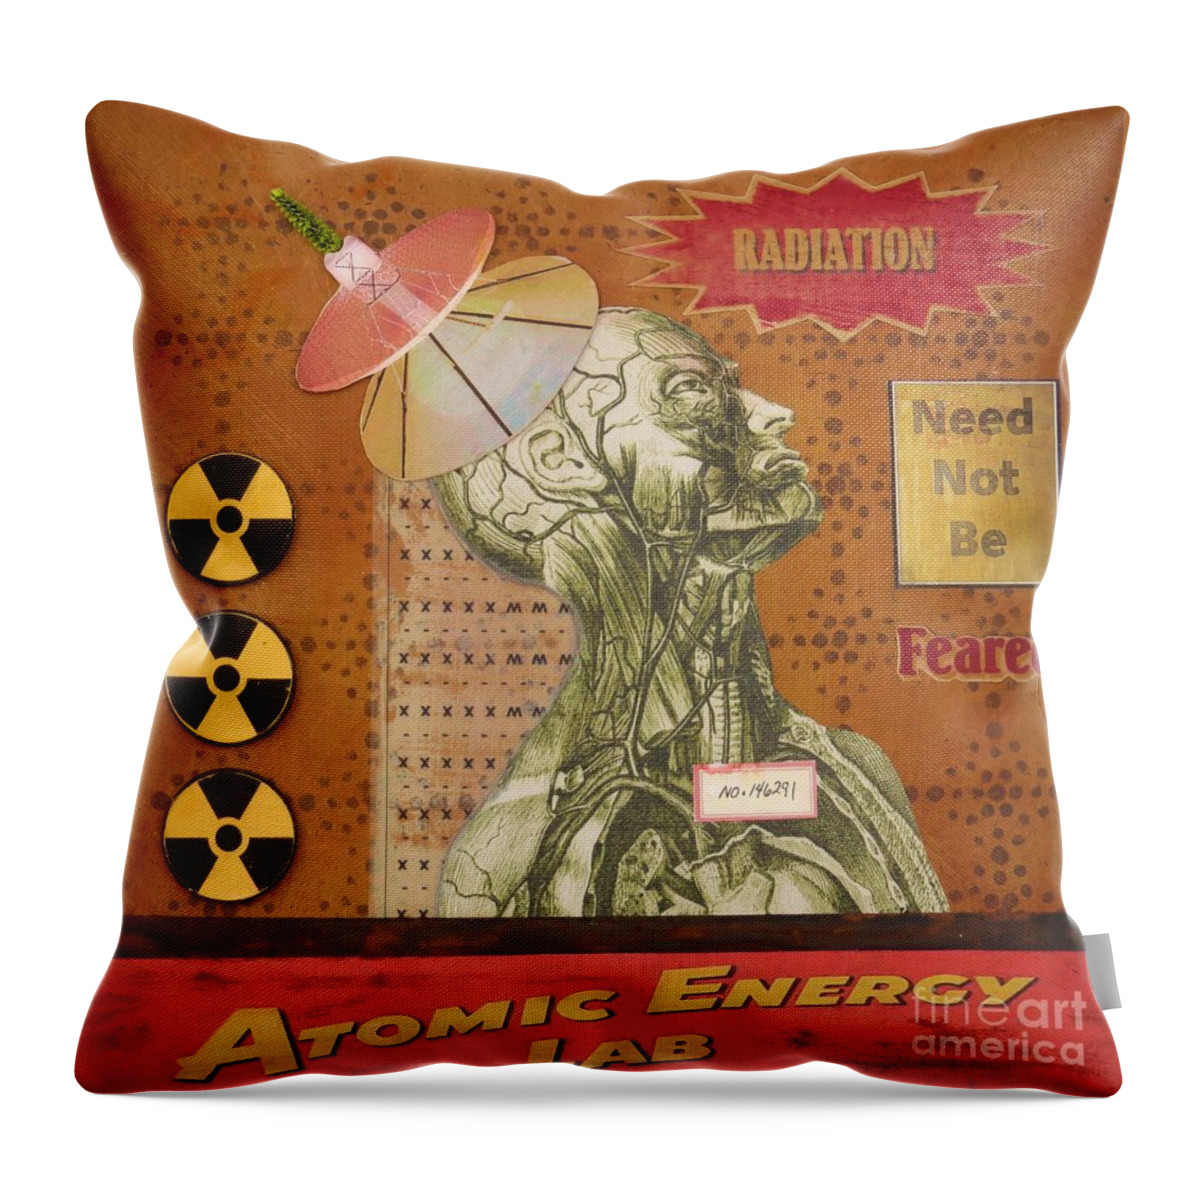 Assemblage Throw Pillow featuring the mixed media Radiation Need Not Be Feared by Desiree Paquette